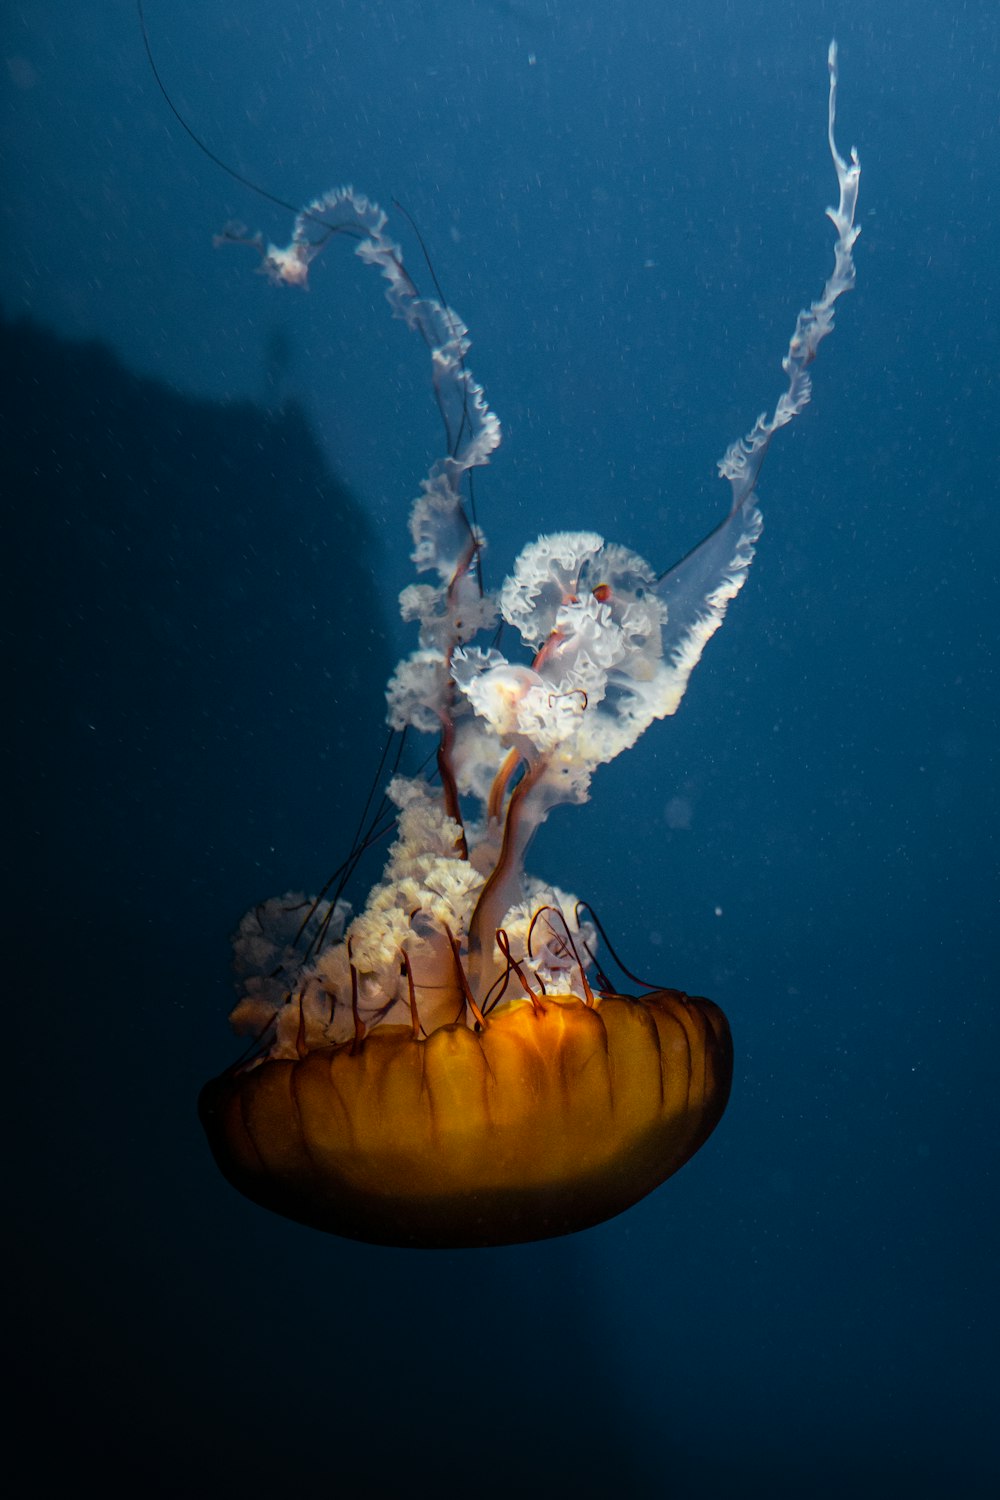 brown and white jellyfish in blue water